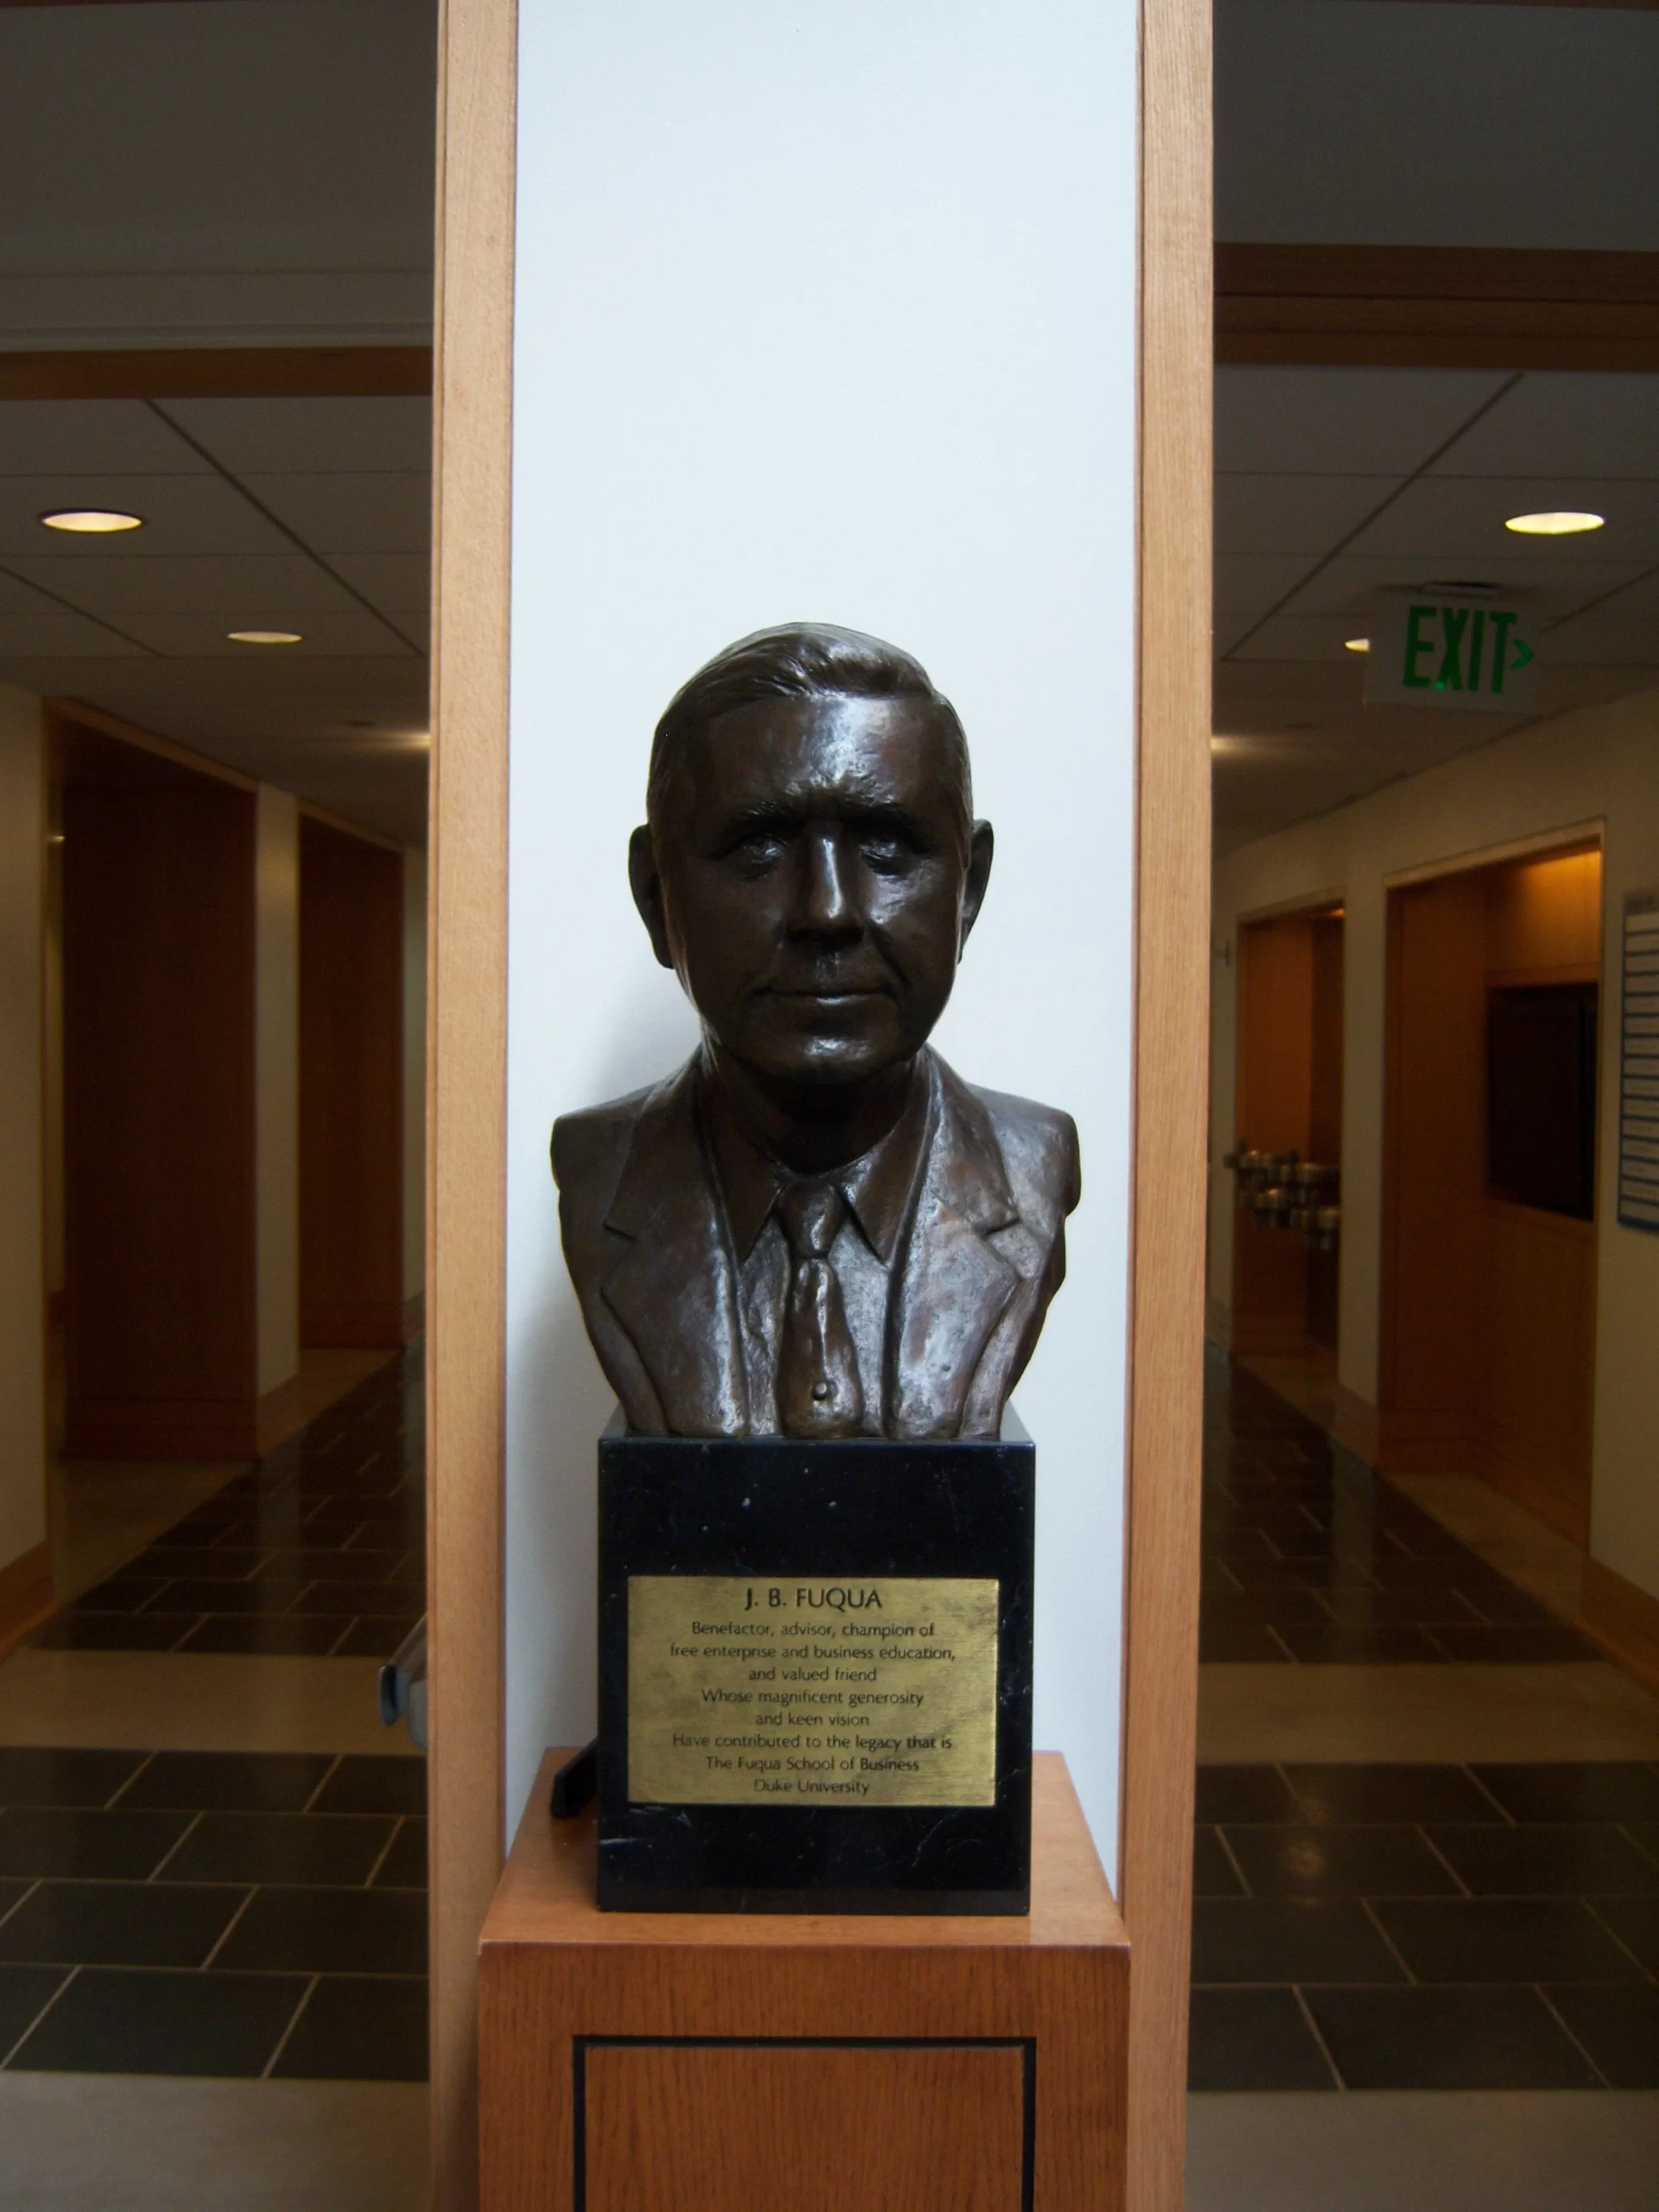 A_Bust_of_J.B._Fuqua_in_the_Hall_of_Flags_at_the_Fuqua_School_of_Business